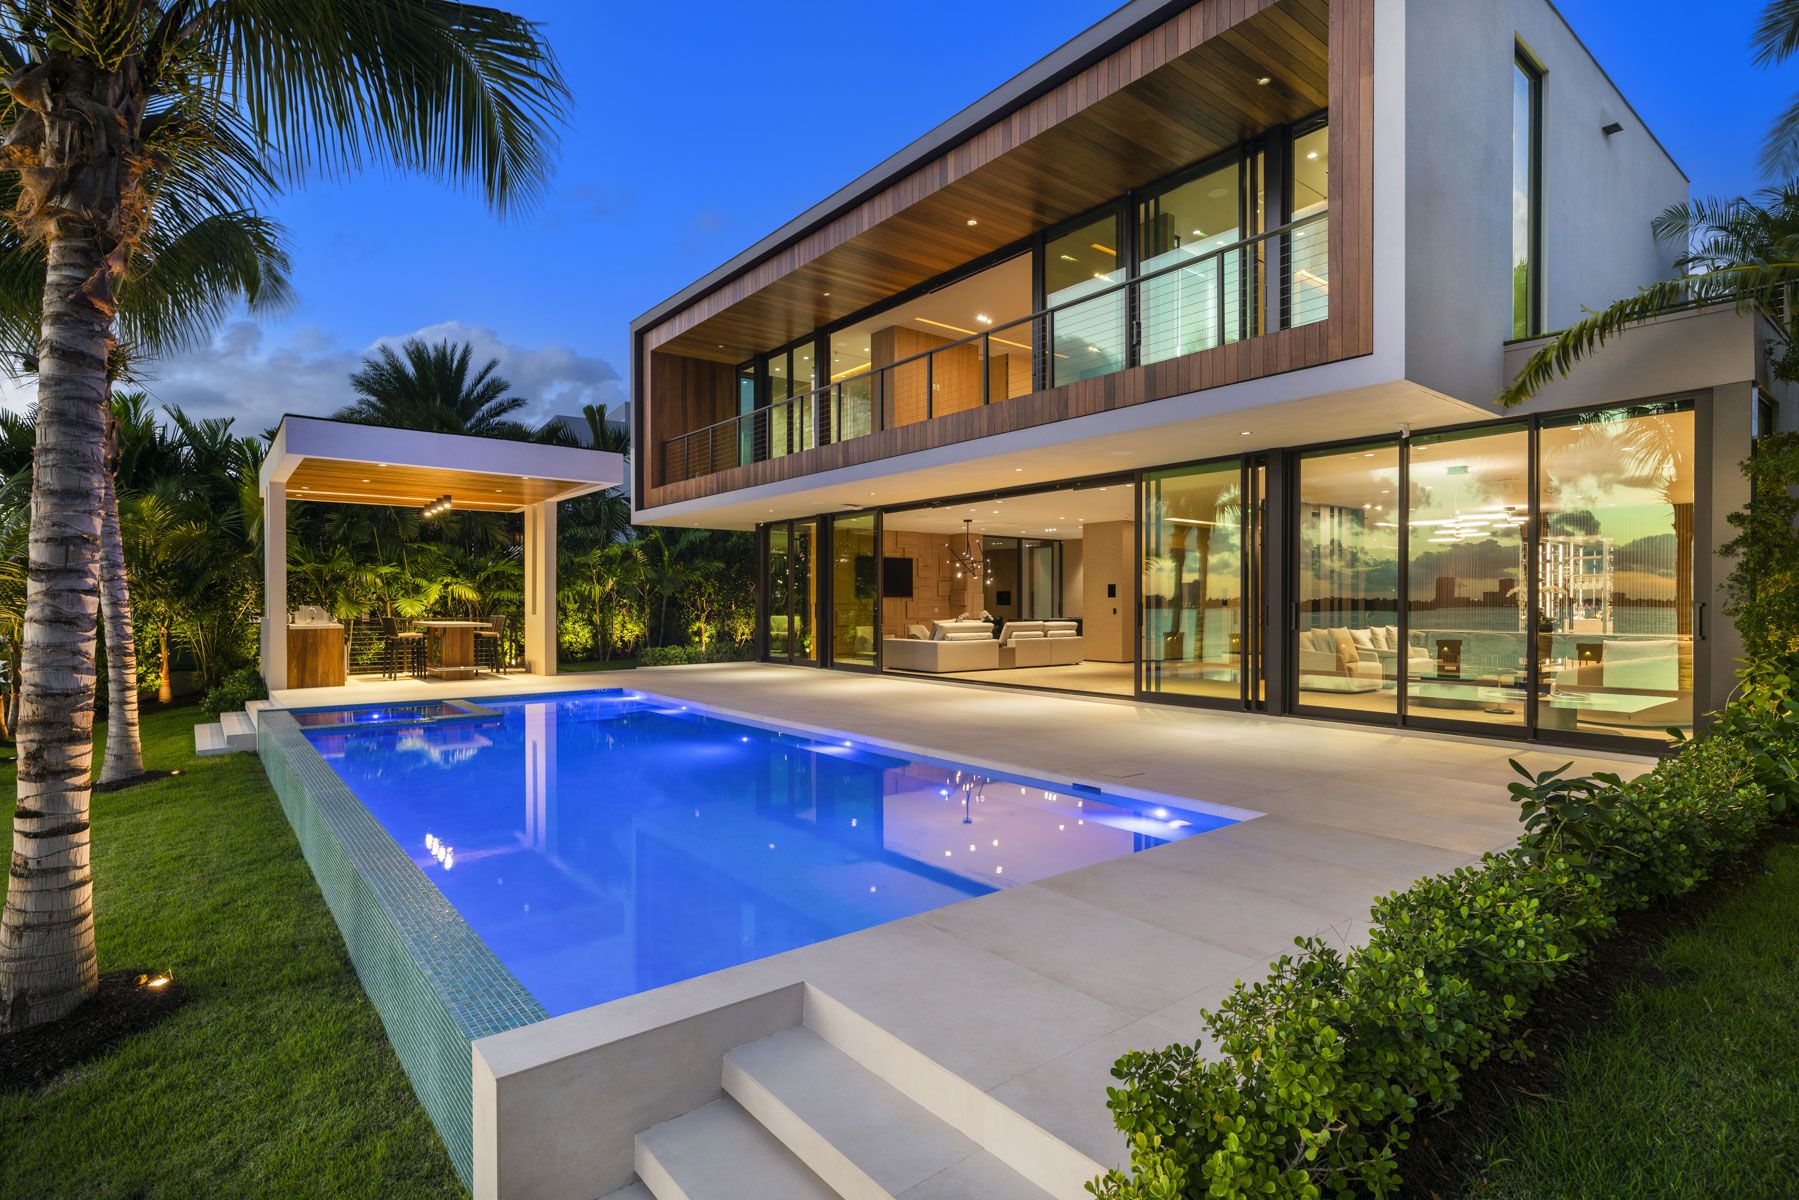 The backyard of a Bay Harbor Islands mansion, featuring a pool deck and wet bar.